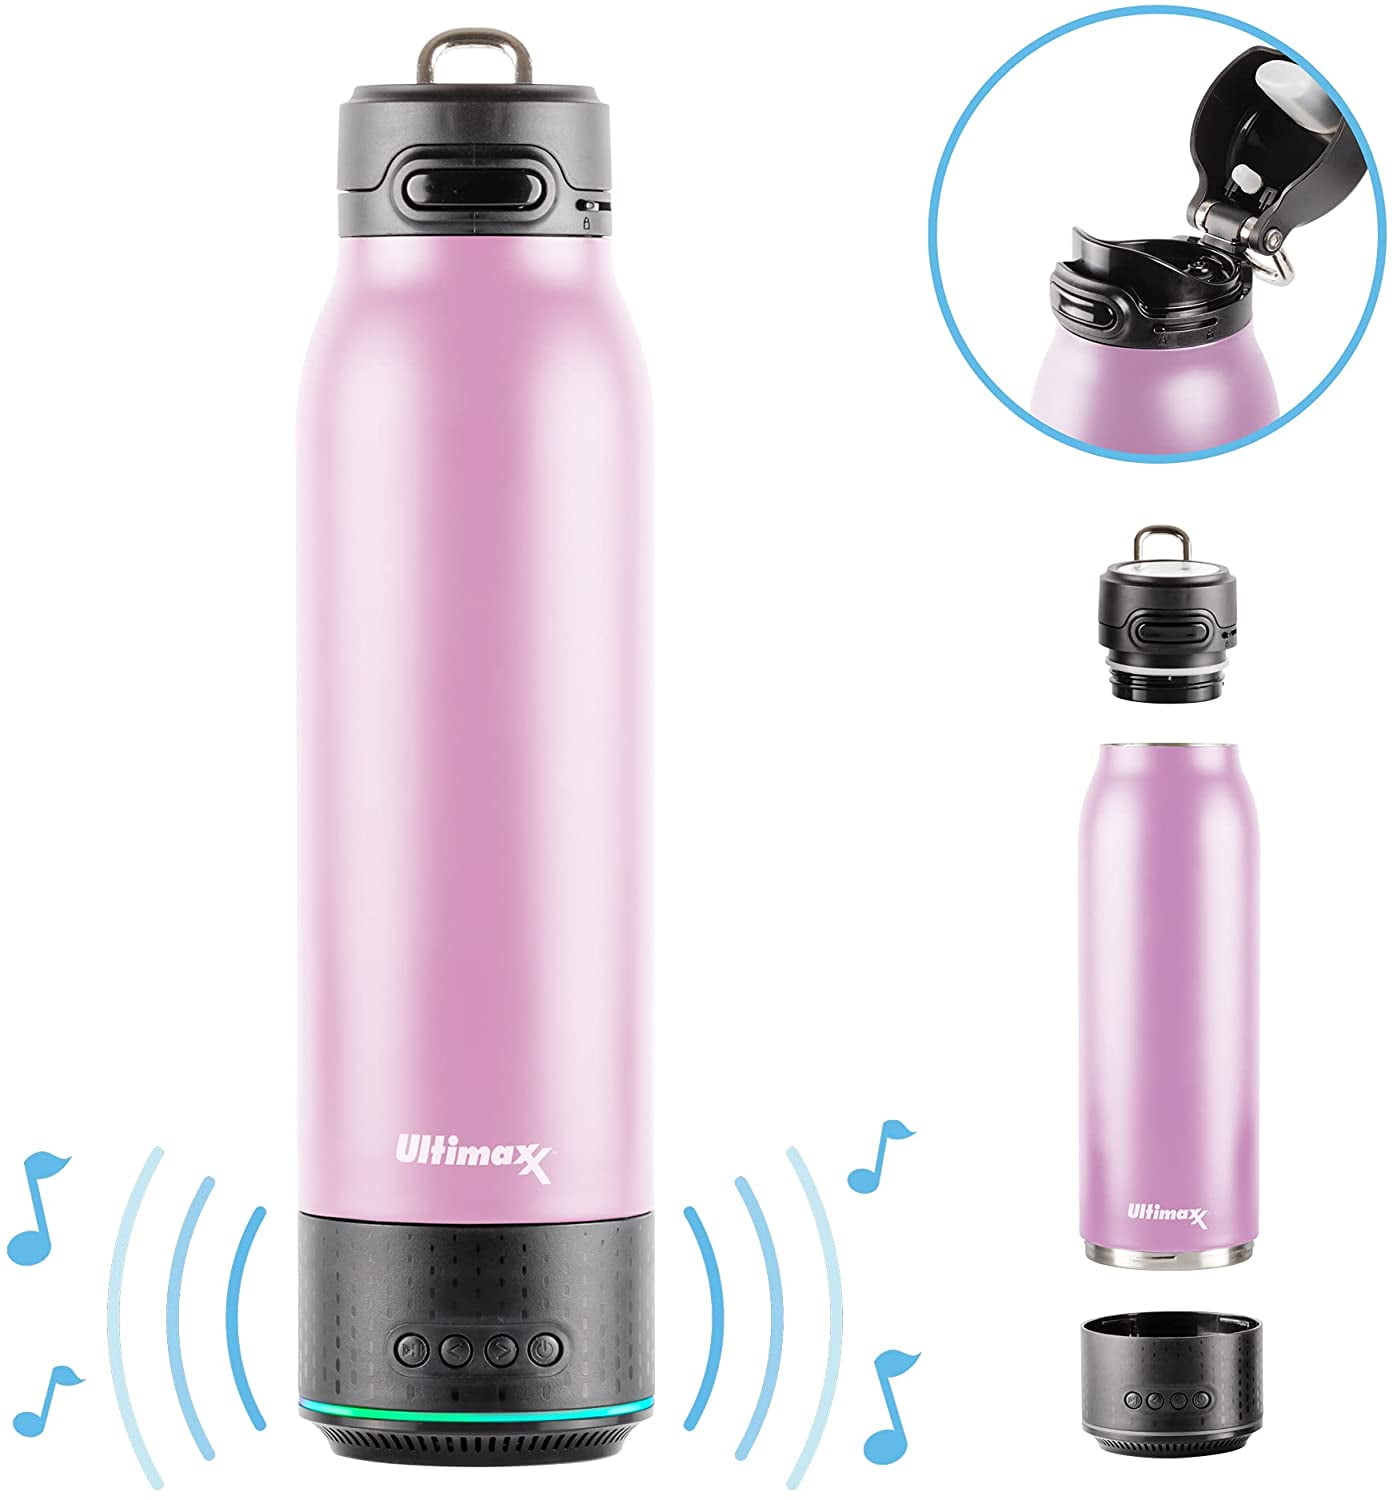 700ml/23.6 oz Convenient drinking spout and Carry Handle Lights Vacuum Insulated Premium Water Bottle with Rechargeable Bluetooth Speaker Lid Lock Steel Double Wall Design Blue 